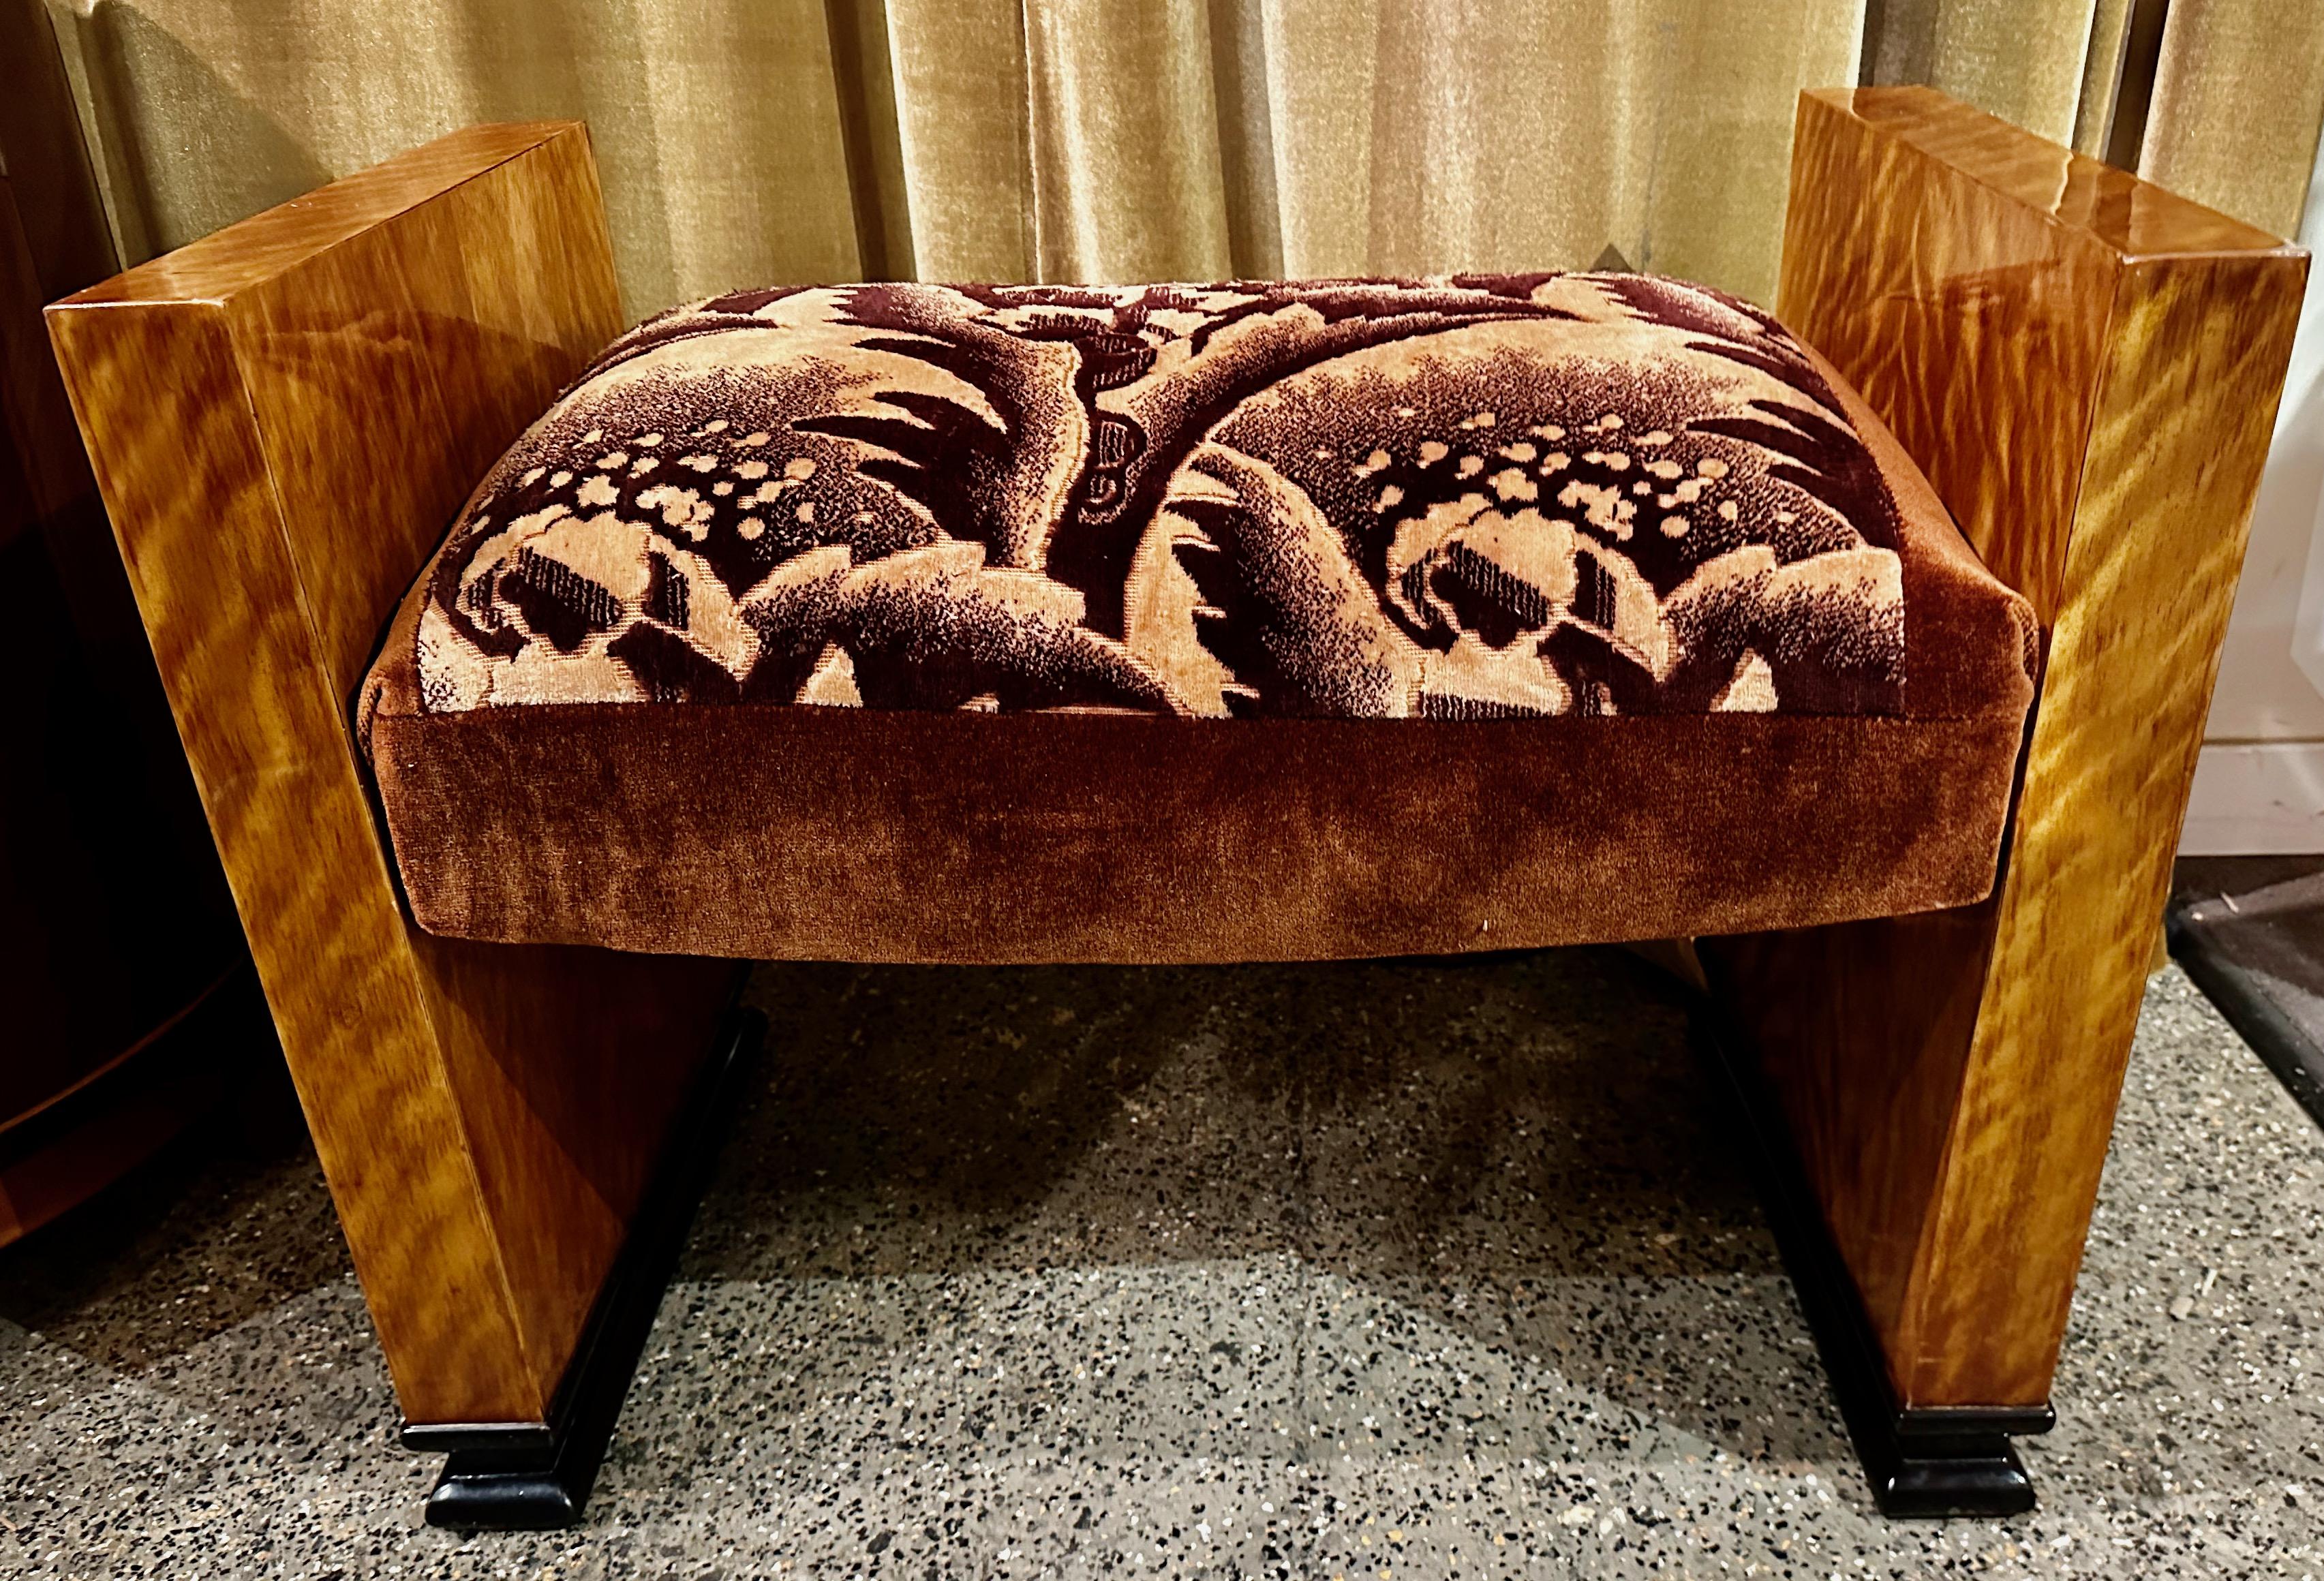 Art Deco European Wooden Petite Bench Original Fabric. Unique bench in solid wood with additional original fabric framed using some vintage brown mohair. This small petite bench would typically be used for smaller seating options, often used for